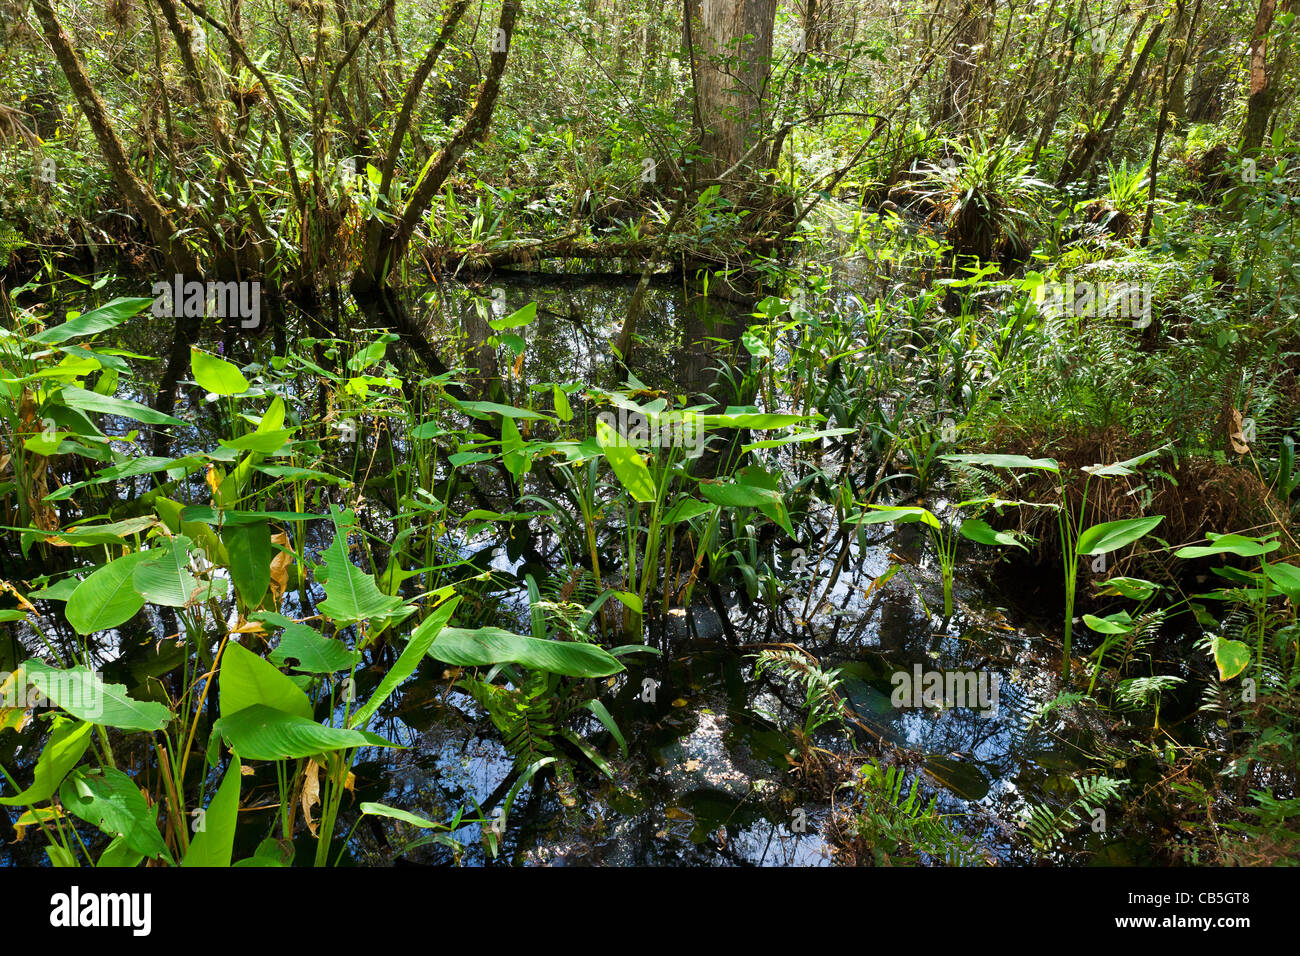 View of the swamp from the boardwalk in Corkscrew Swamp Sanctuary, near Naples, Gulf Coast, Florida, USA Stock Photo